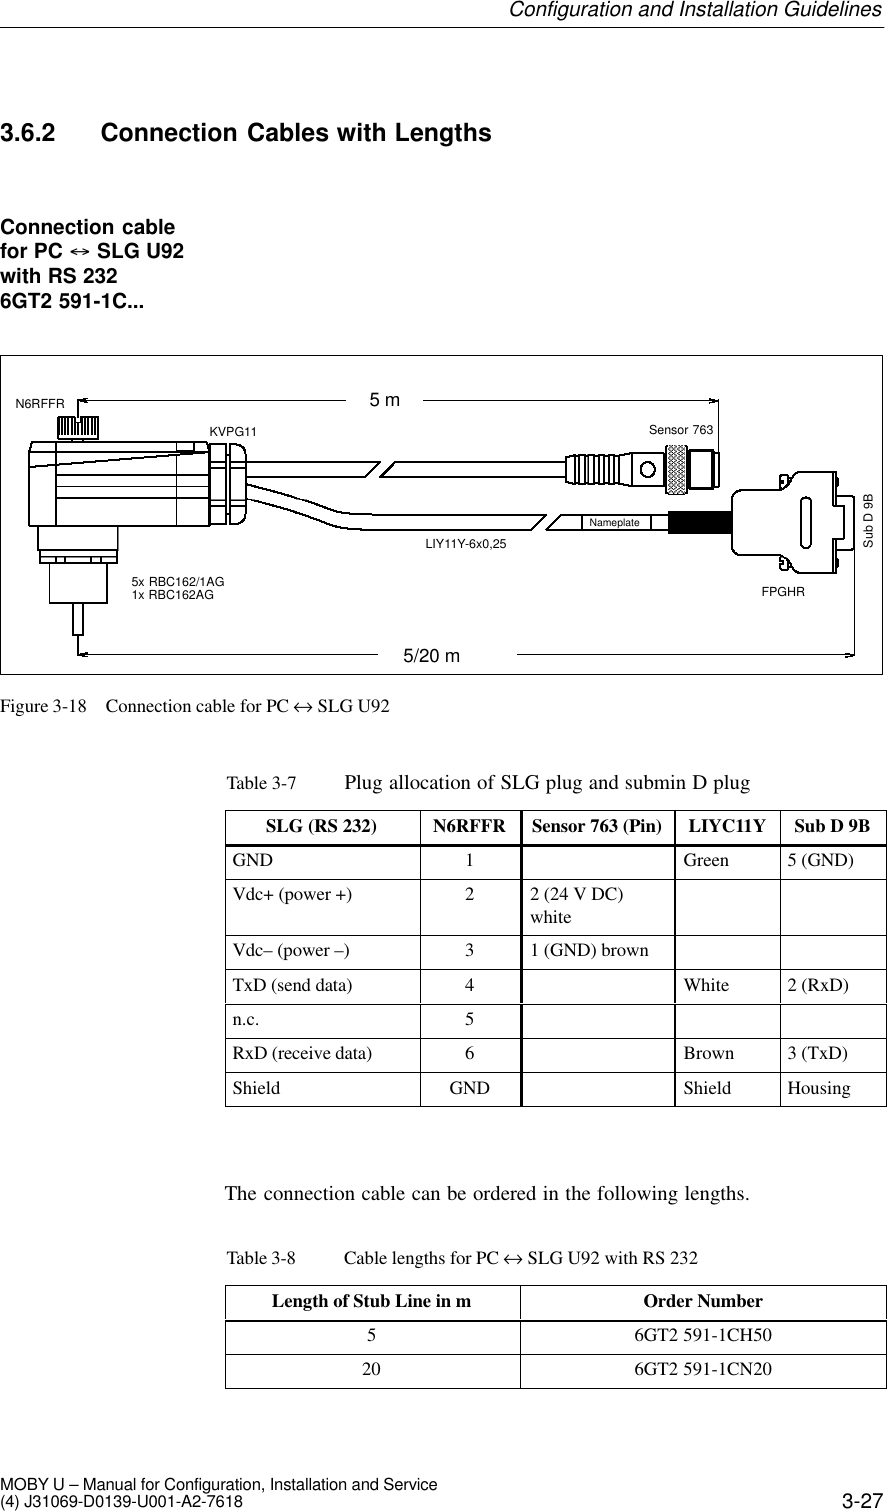 3-27MOBY U – Manual for Configuration, Installation and Service(4) J31069-D0139-U001-A2-76183.6.2 Connection Cables with Lengths5 m5/20 mN6RFFRKVPG11 Sensor 763FPGHRLIY11Y-6x0,255x RBC162/1AGNameplateSub D 9B1x RBC162AGFigure 3-18 Connection cable for PC ↔ SLG U92Table 3-7 Plug allocation of SLG plug and submin D plugSLG (RS 232) N6RFFR Sensor 763 (Pin) LIYC11Y Sub D 9BGND 1 Green 5 (GND)Vdc+ (power +) 22 (24 V DC)whiteVdc– (power –) 31 (GND) brownTxD (send data) 4 White 2 (RxD)n.c. 5RxD (receive data) 6 Brown 3 (TxD)Shield GND Shield HousingThe connection cable can be ordered in the following lengths.Table 3-8 Cable lengths for PC ↔ SLG U92 with RS 232Length of Stub Line in m Order Number56GT2 591-1CH5020 6GT2 591-1CN20Connection cablefor PC e SLG U92 with RS 232 6GT2 591-1C...Configuration and Installation Guidelines